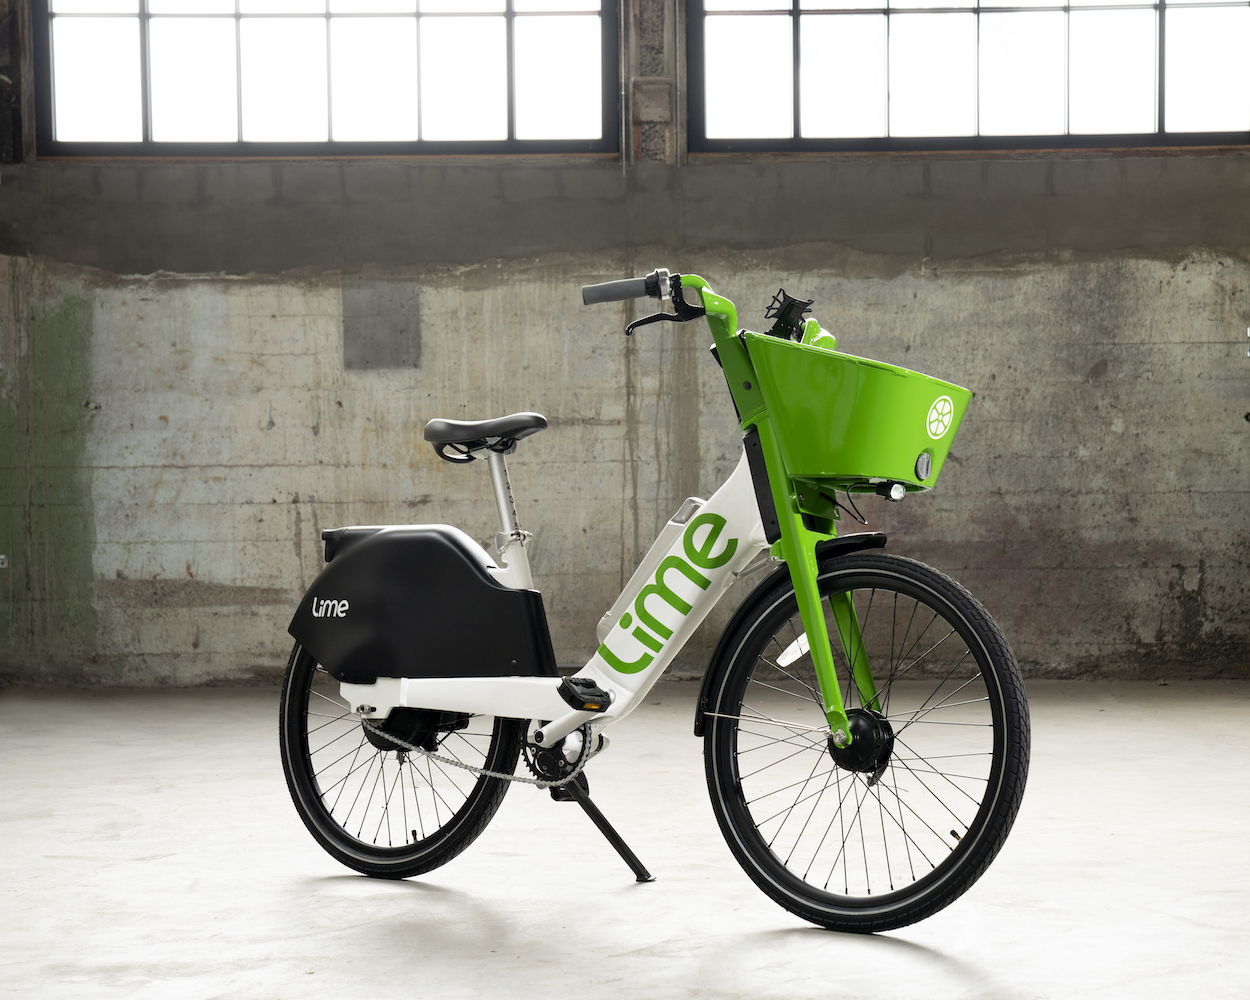 Lime rolls out new electric bikes with automatic shifting and higher